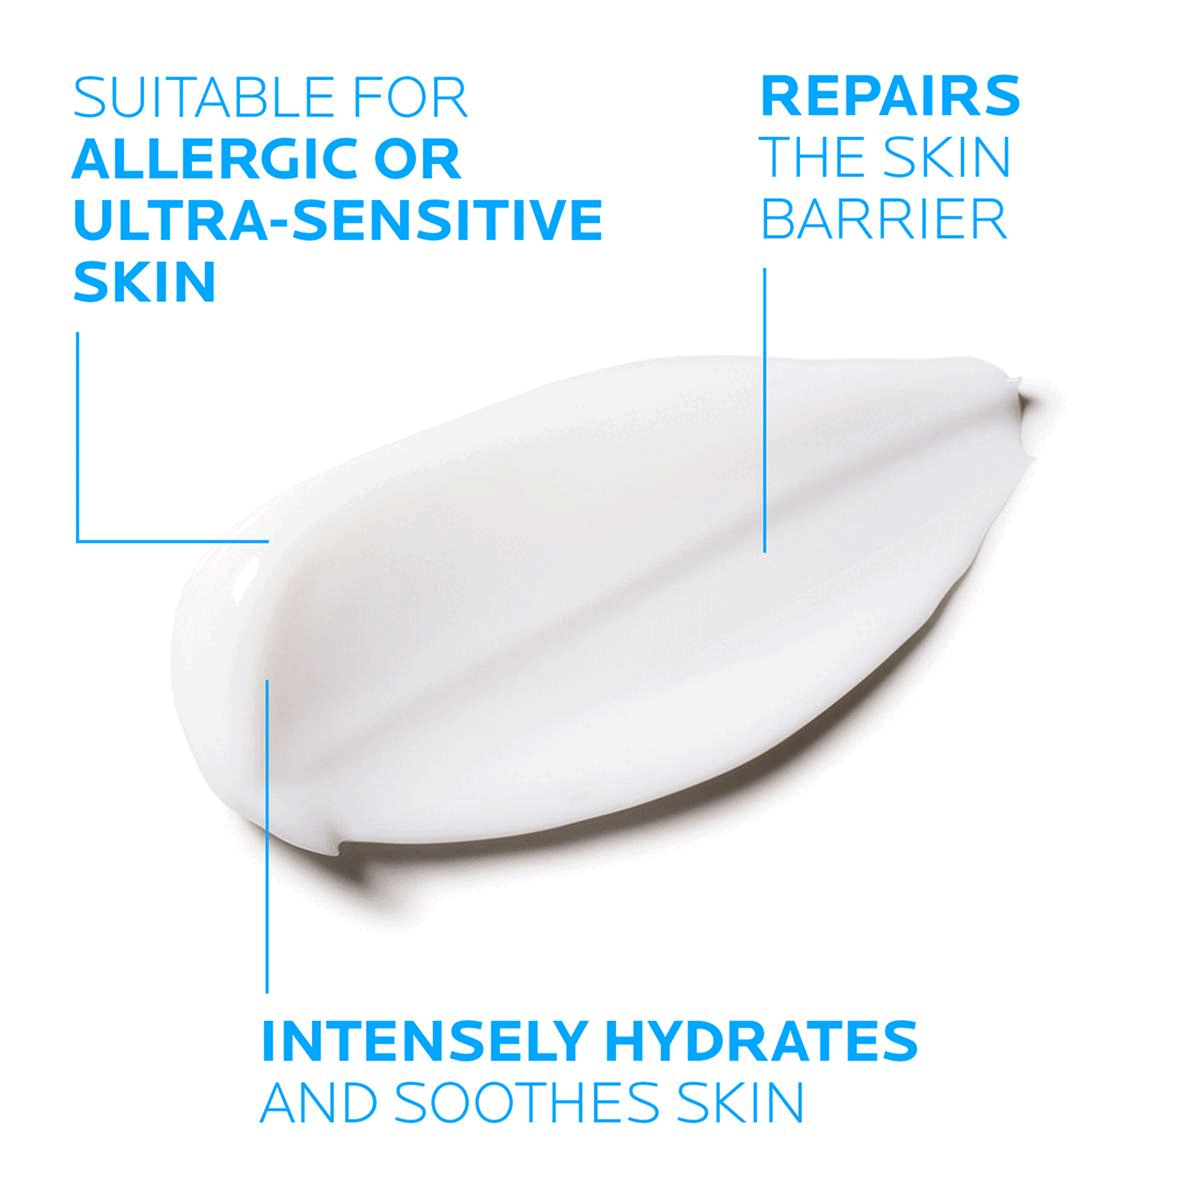 Image 1, SUITABLE FOR ALLERGIC OR ULTRA-SENSITIVE SKIN REPAIRS THE SKIN BARRIER INTENSELY HYDRATES AND SOOTHES SKIN Image 2, NEUROSENSINE ALLERGY-PRONE SKIN Reduces pain Sensations and skin Reactivity SPHINGOBIOMA REBALANCING MICROBIOME Function Image 3, DERMATOLOGIST RECOMMENDED DERMOCOSMETIC BRAND WORLDWIDE